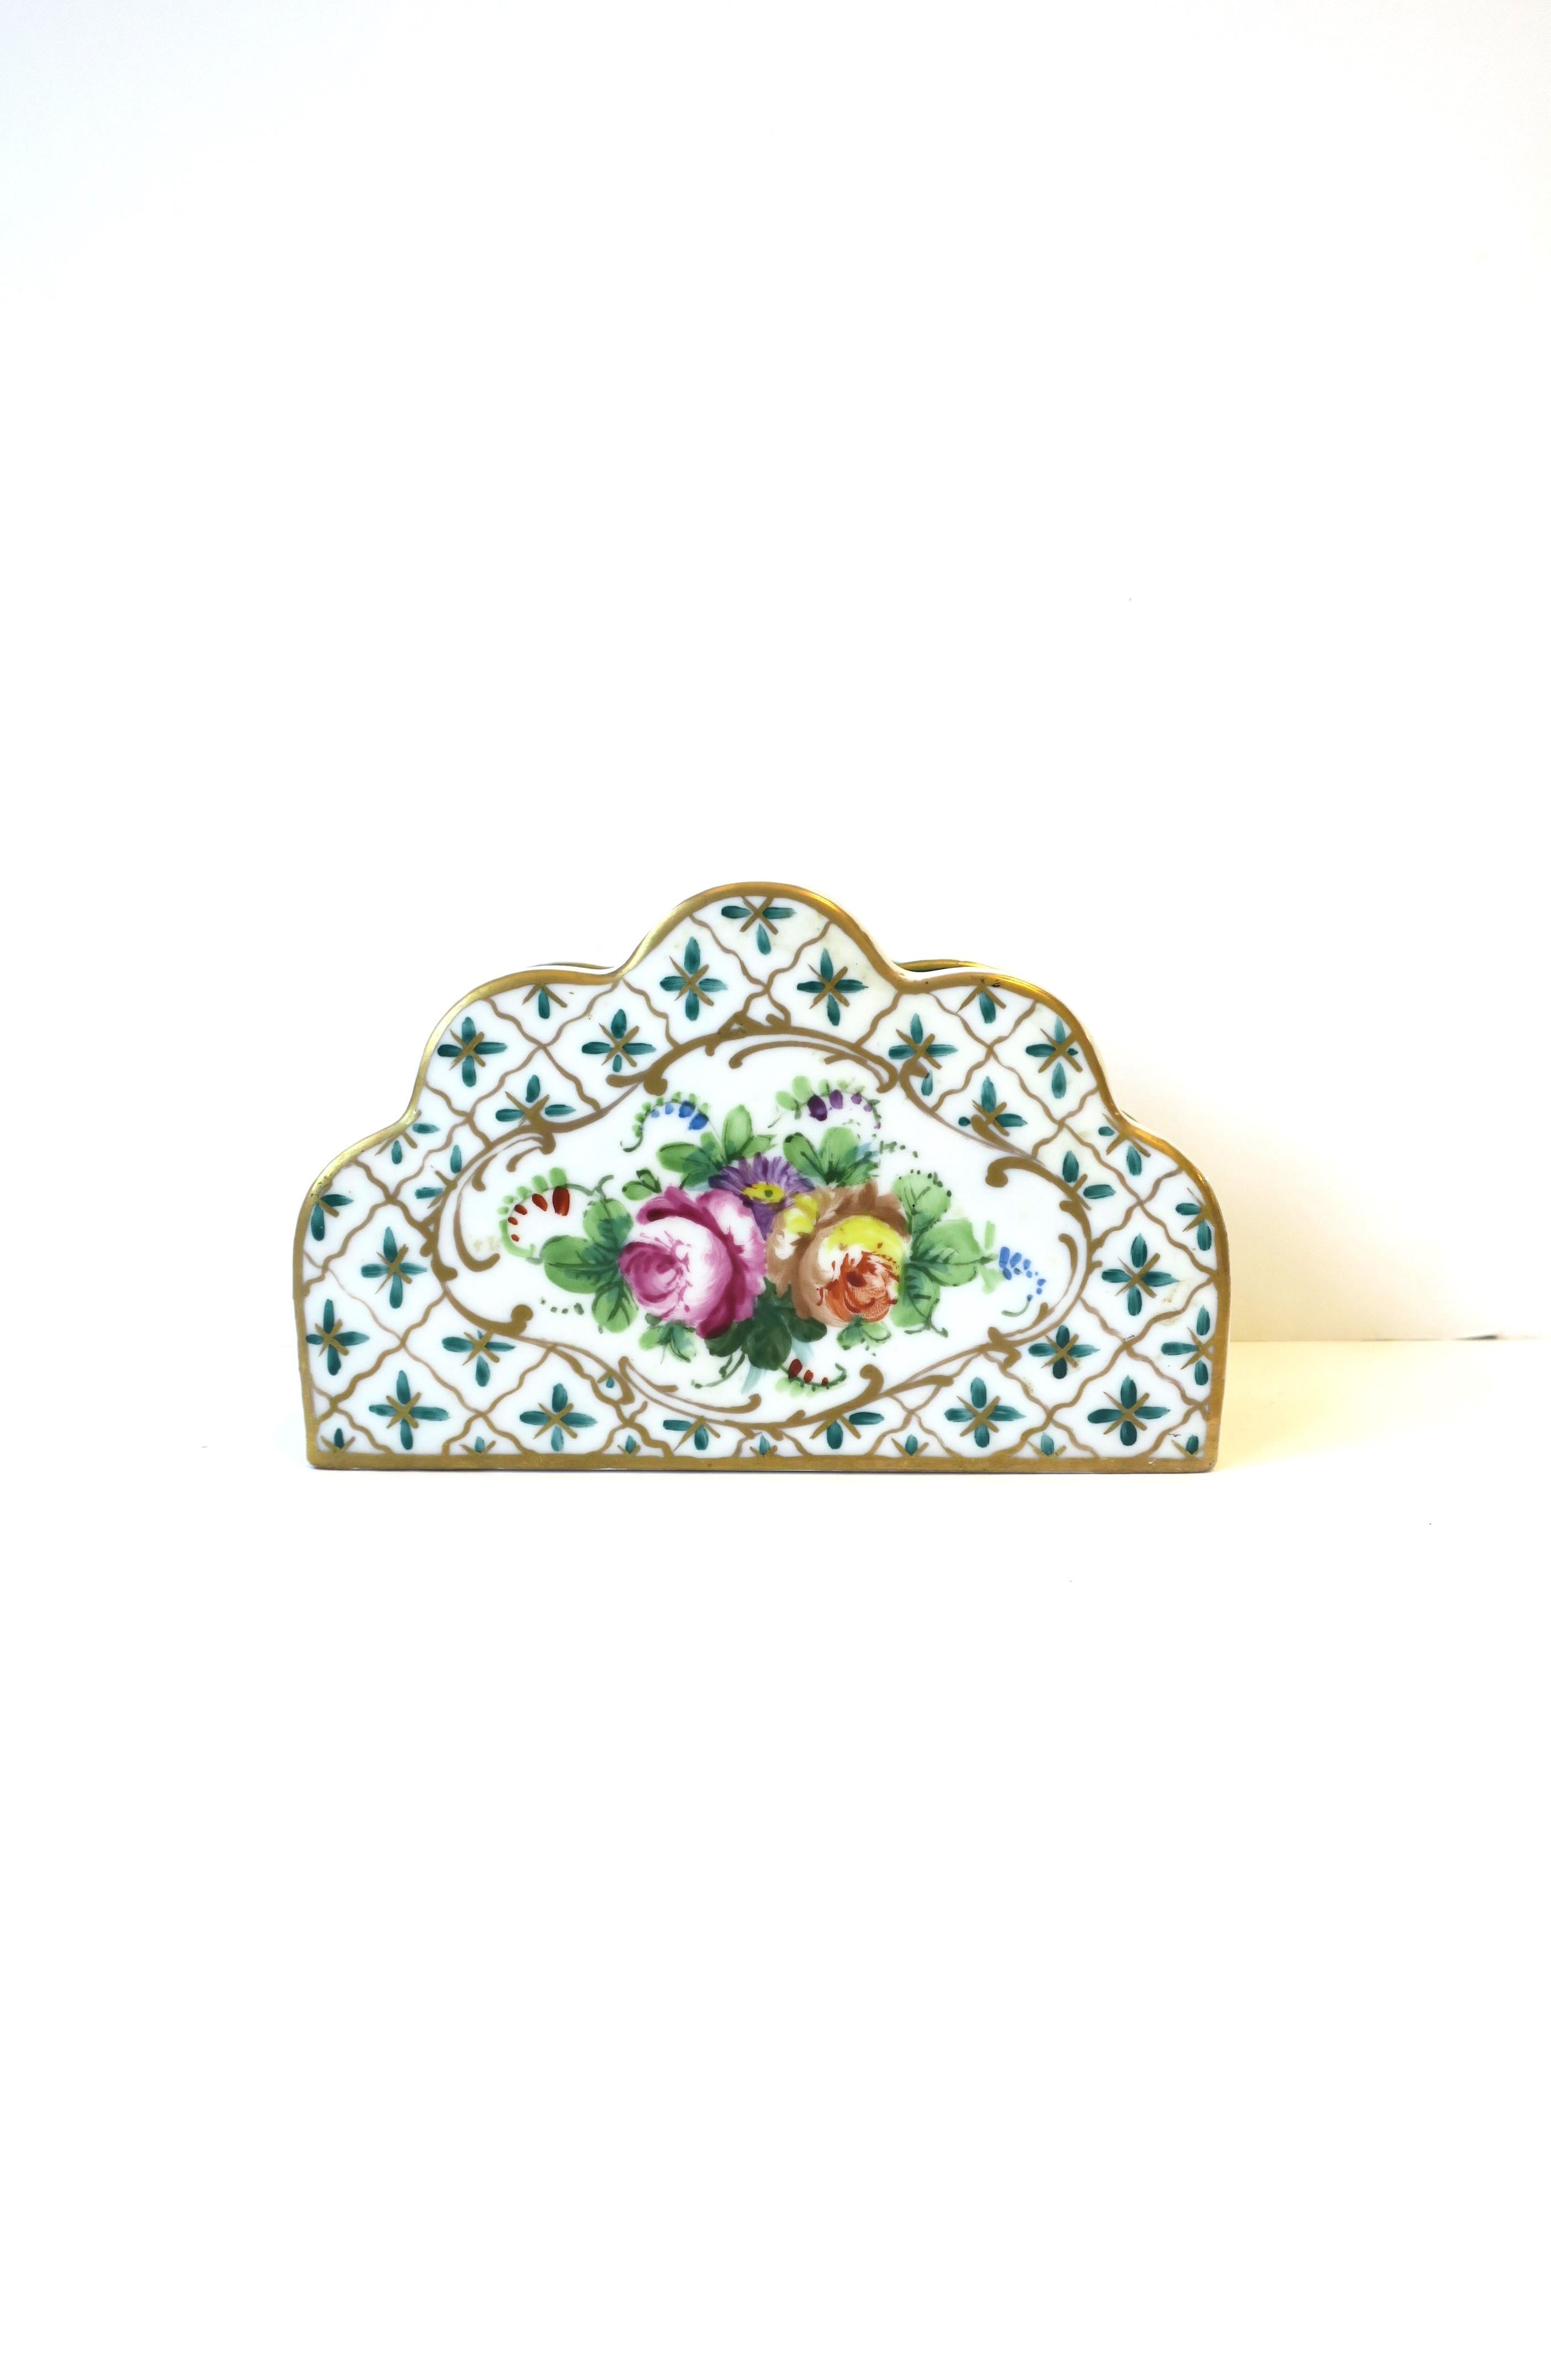 A very beautiful hand-painted French porcelain mail letter desk holder, circa early-20th century, France. 
Colors include Emerald green, gold, orange/red, pink, purple, yellow, and touches of blue, all on a white porcelain ground. Markers' mark on